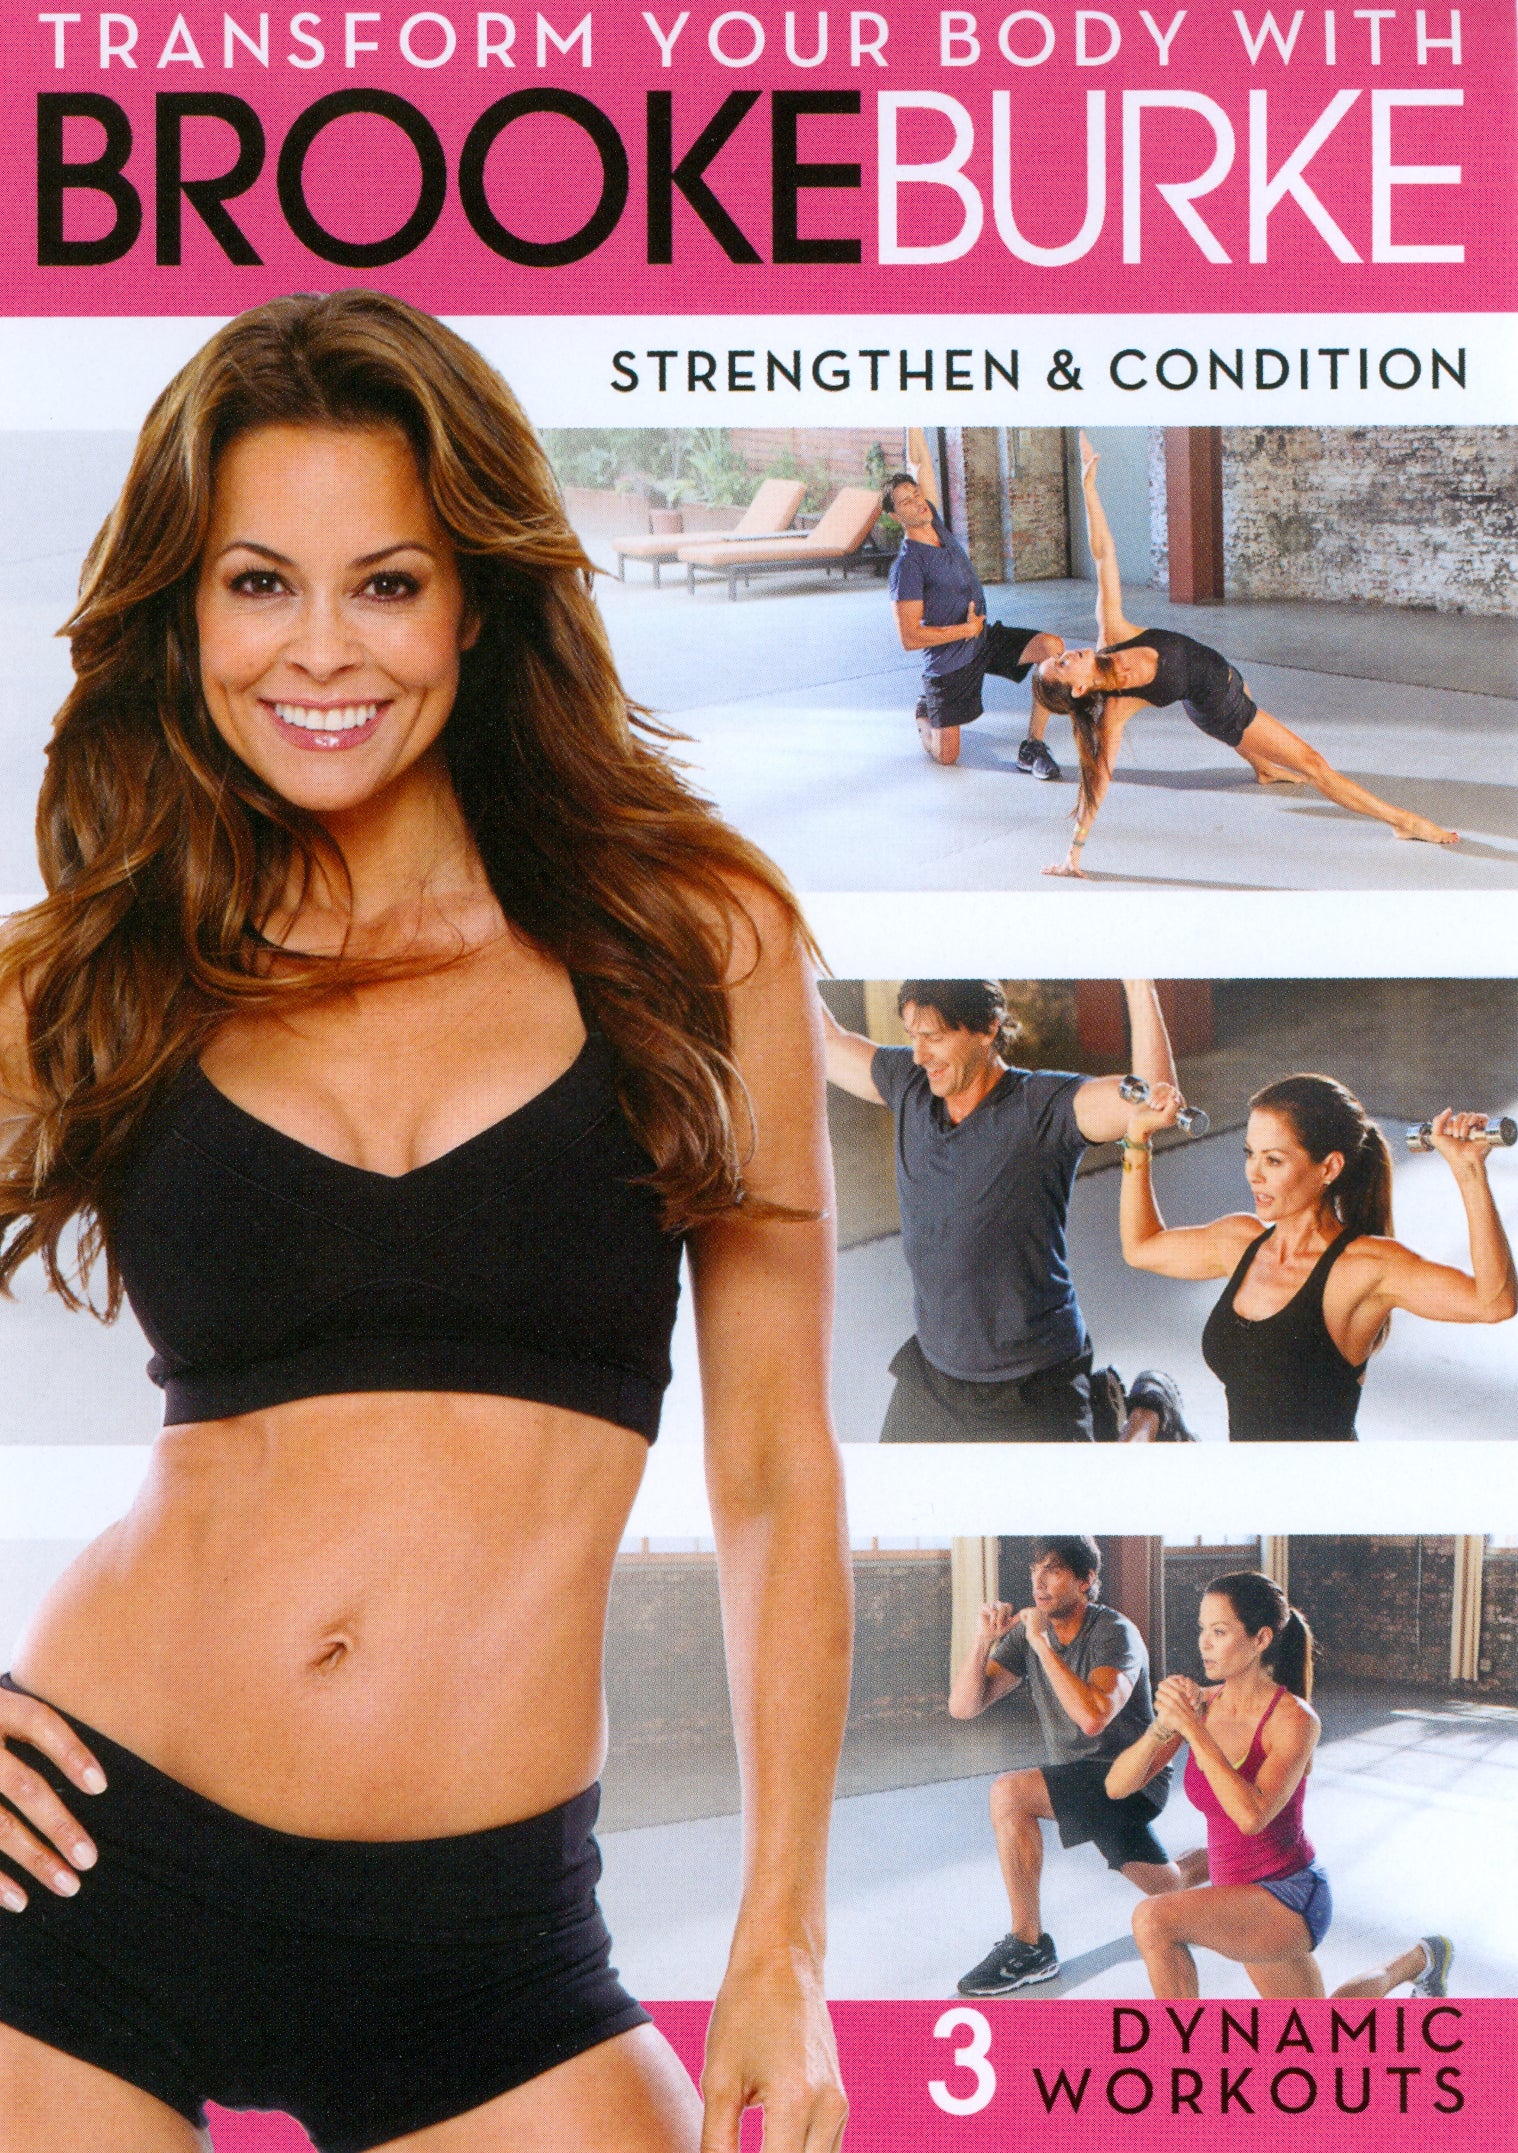 Transform Your Body with Brooke Burke: Strengthen & Condition cover art